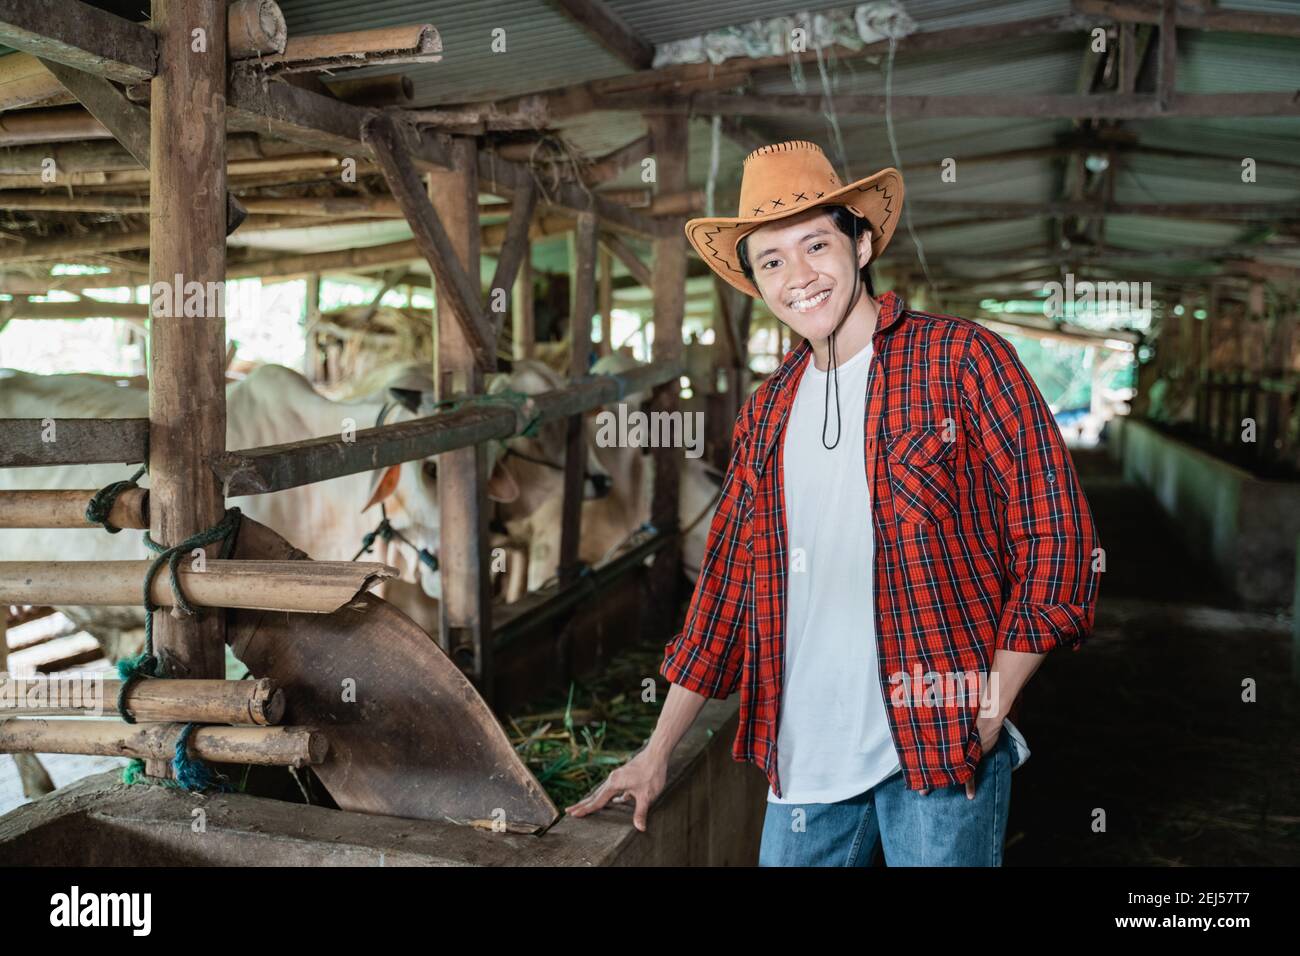 https://c8.alamy.com/comp/2EJ57T7/a-farmer-wearing-a-cowboy-hat-is-standing-with-one-hand-in-a-pocket-pose-in-the-background-of-a-cow-farm-stable-2EJ57T7.jpg